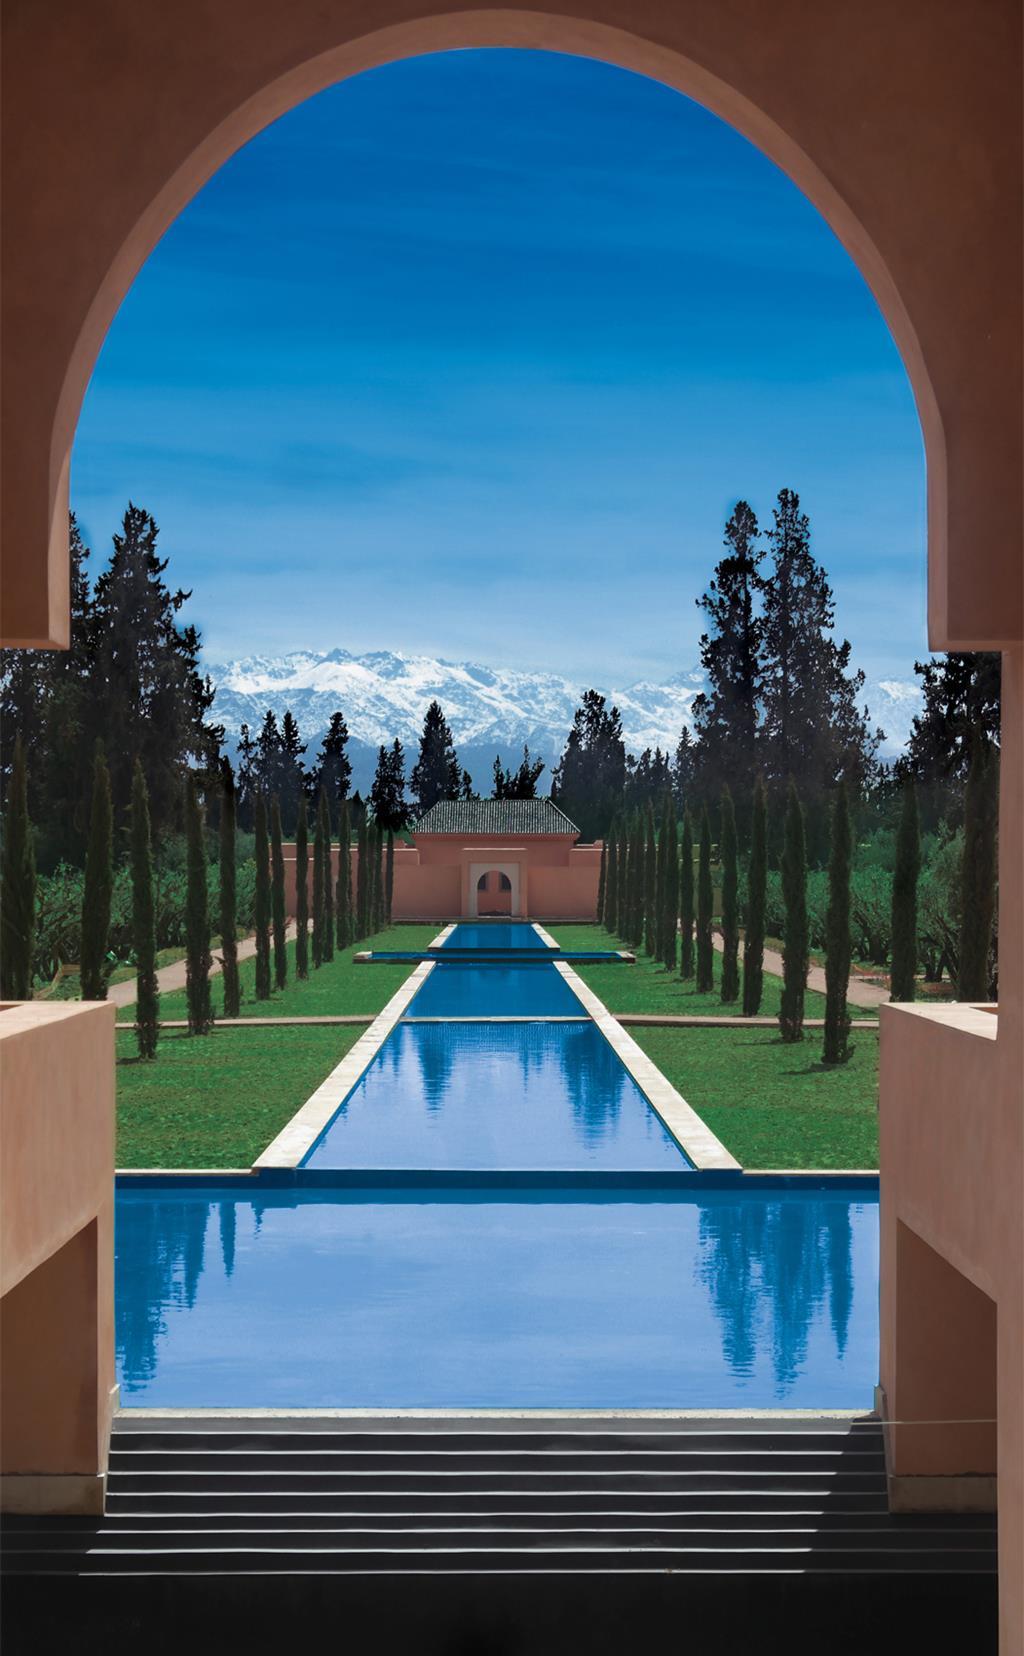 The Oberoi Marrakech – a sprawling new spa resort nestled amid 25 acres of citrus orchards and olive groves